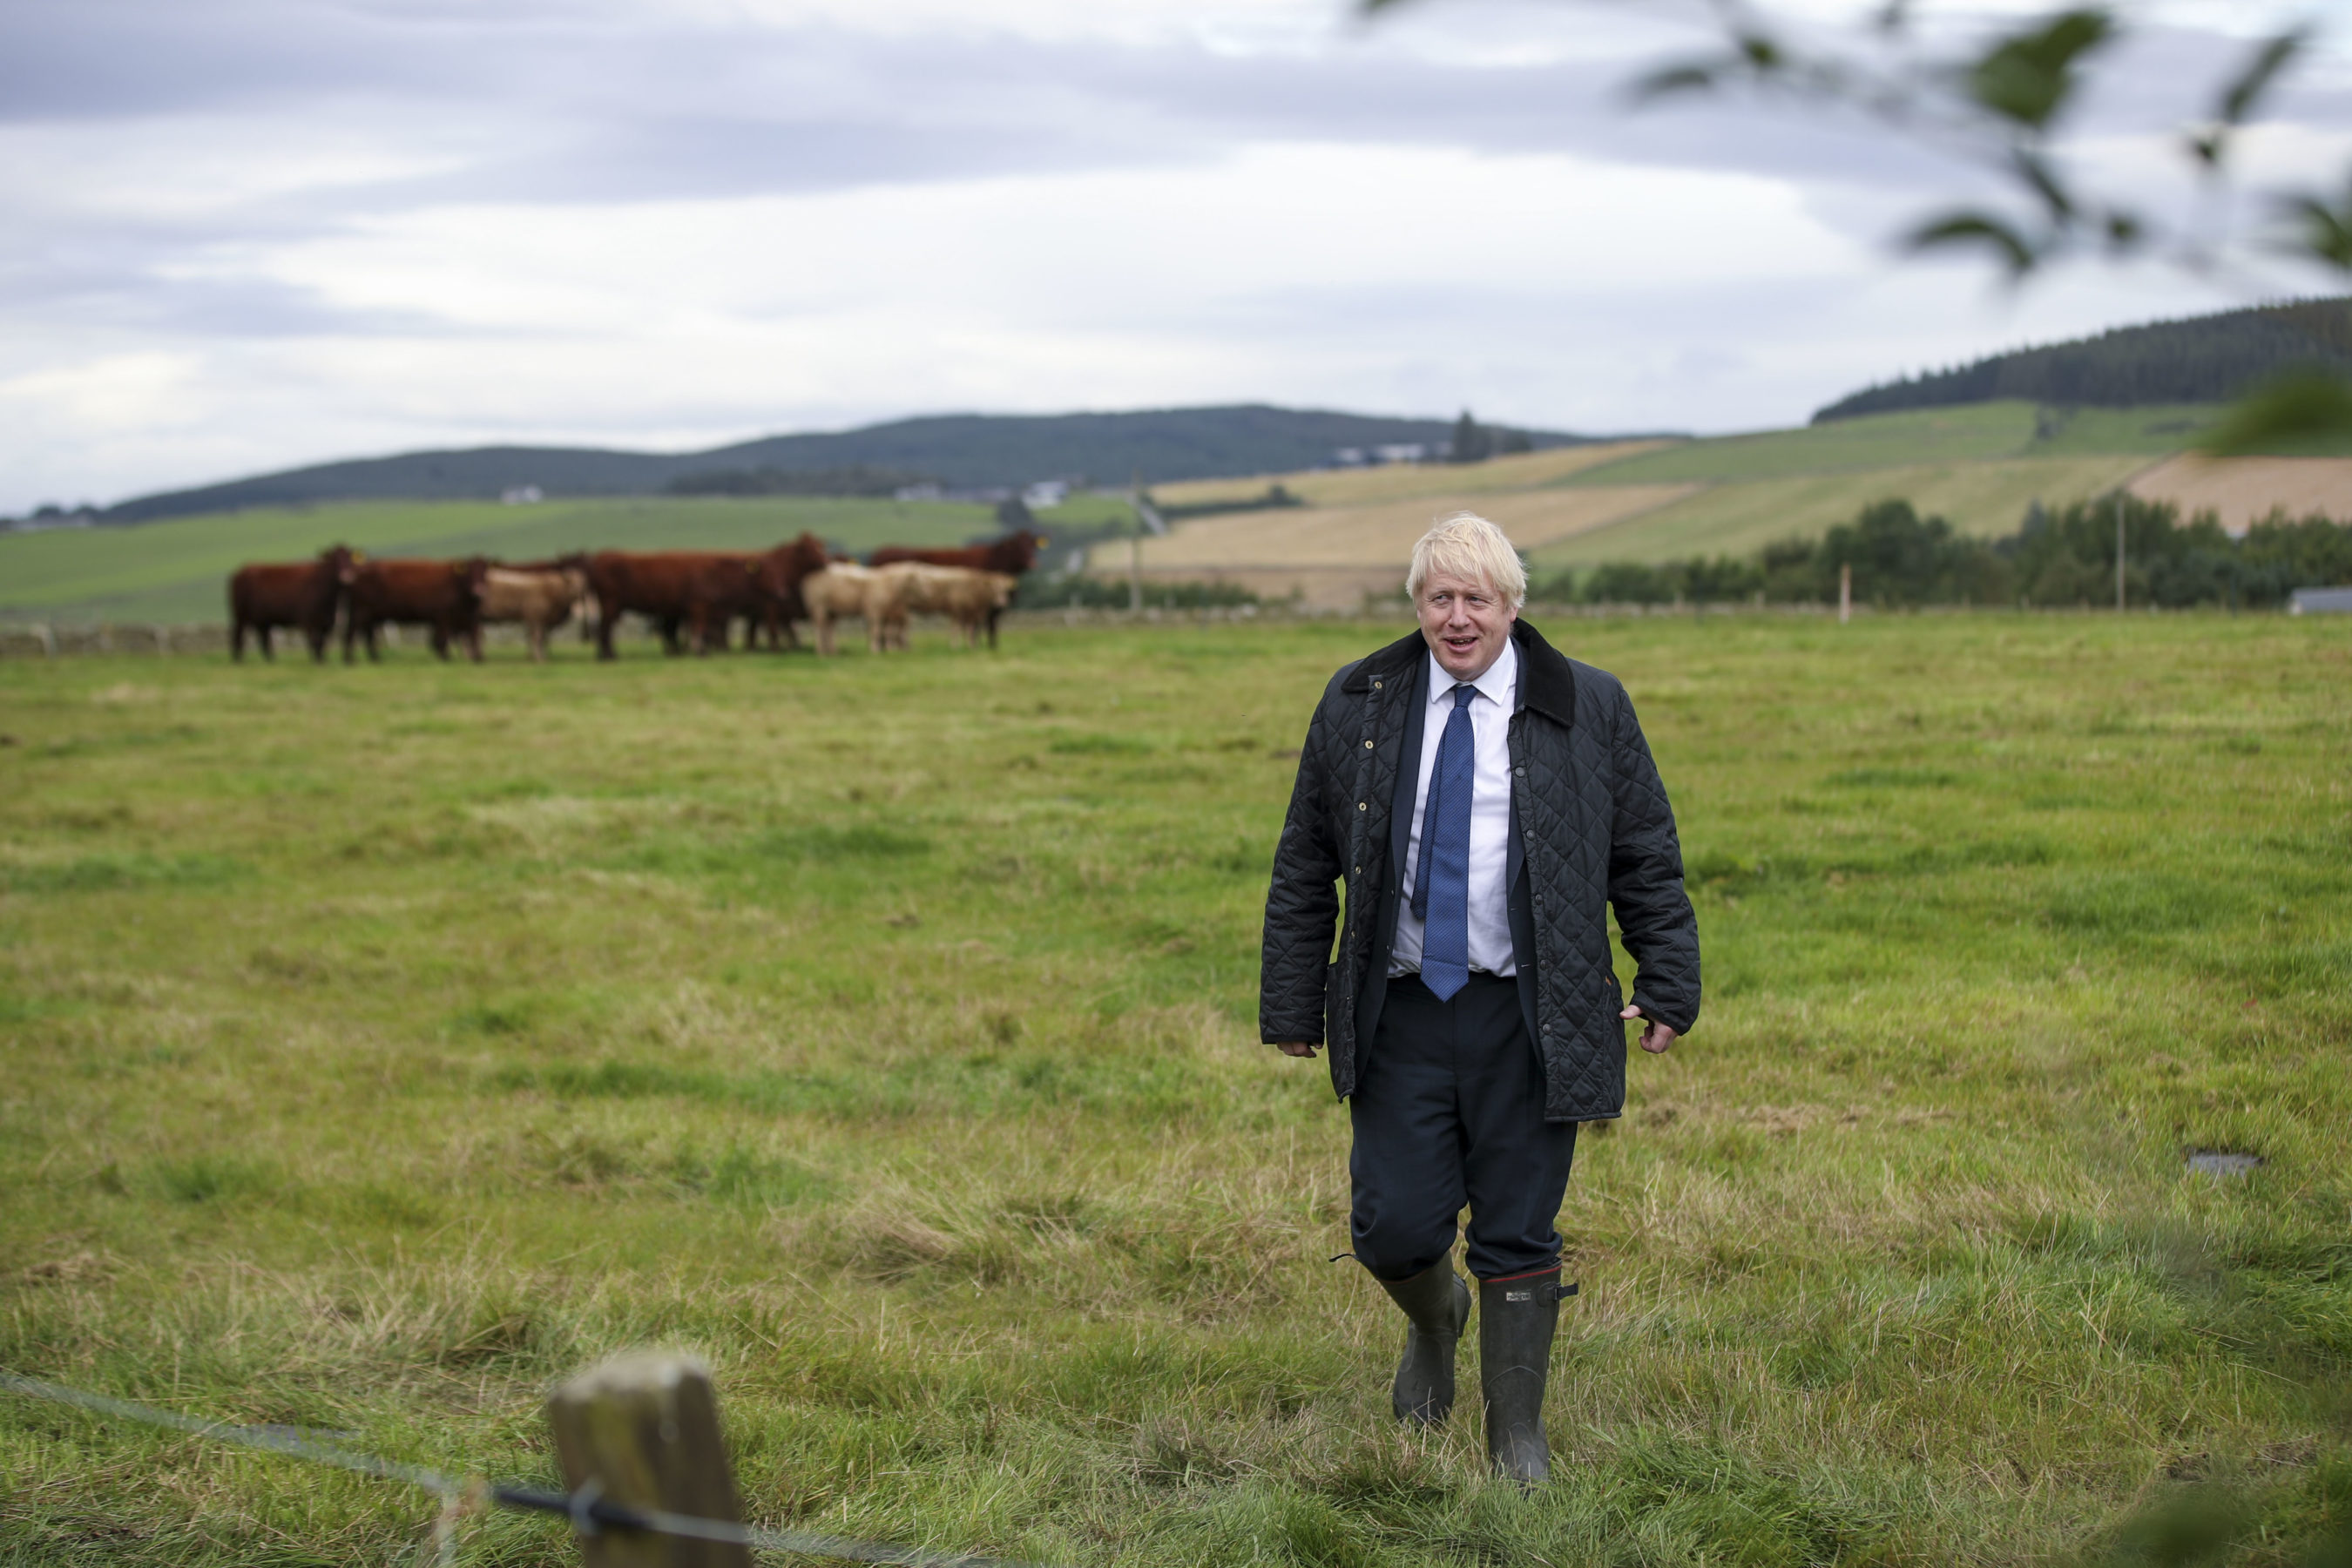 The Last Prime Minister of the United Kingdom, or One of the Greats? Boris Johnson Scottish Independence